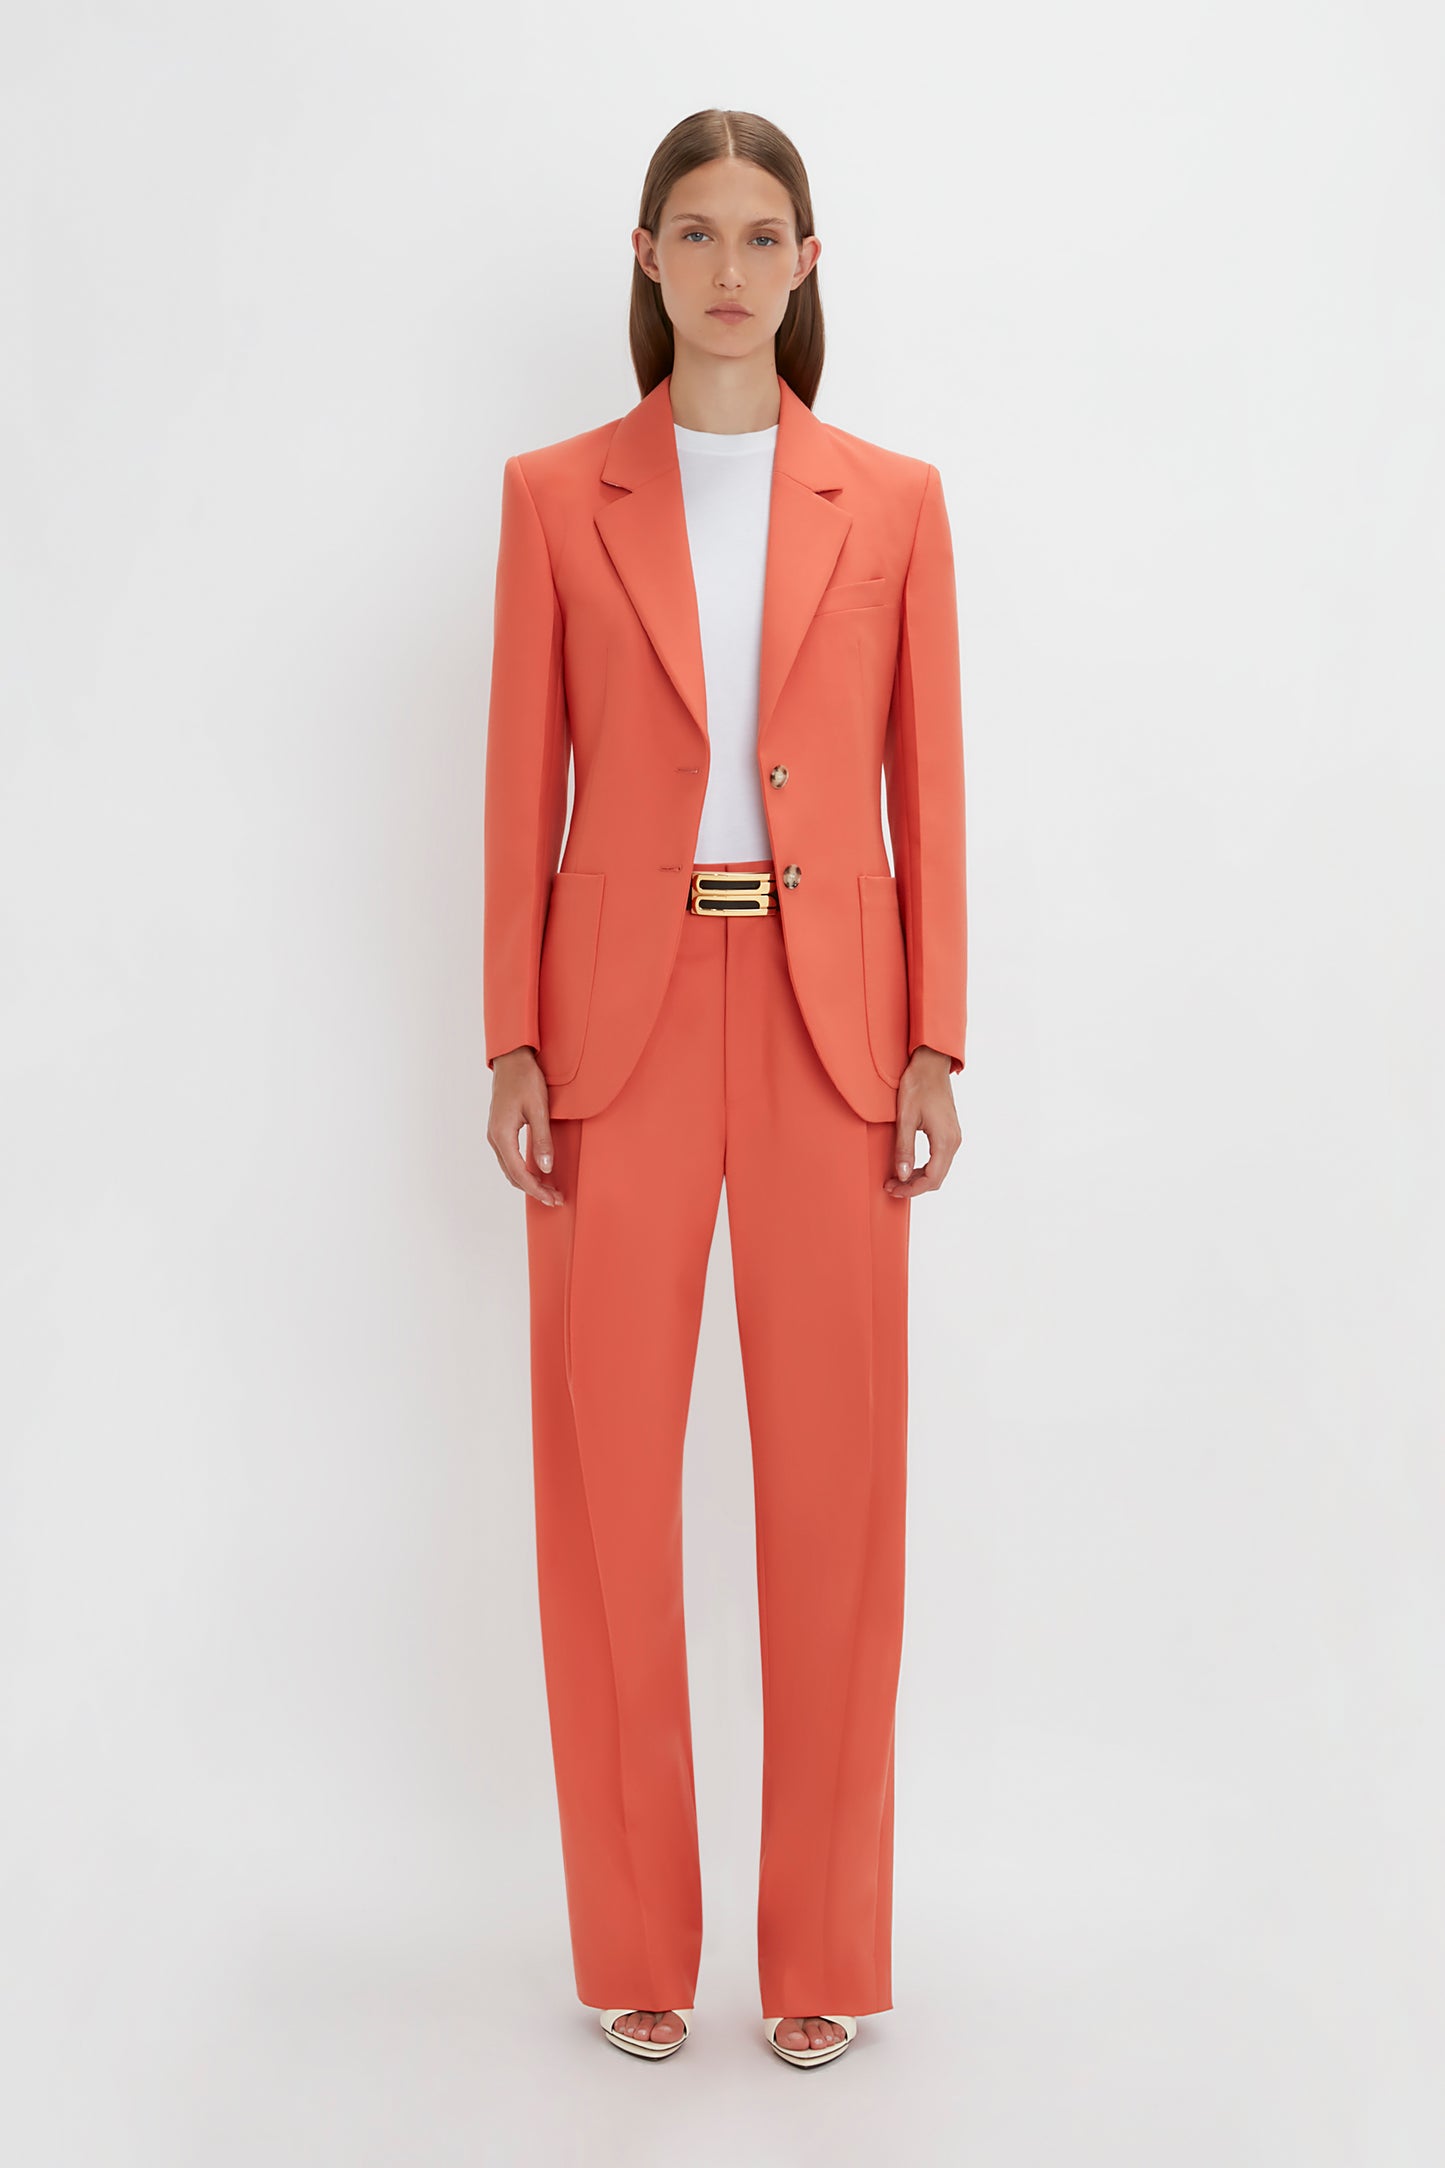 A woman stands against a plain background wearing a Victoria Beckham orange single-breasted jacket in papaya with matching single pleat trousers, complemented by silver sandals.